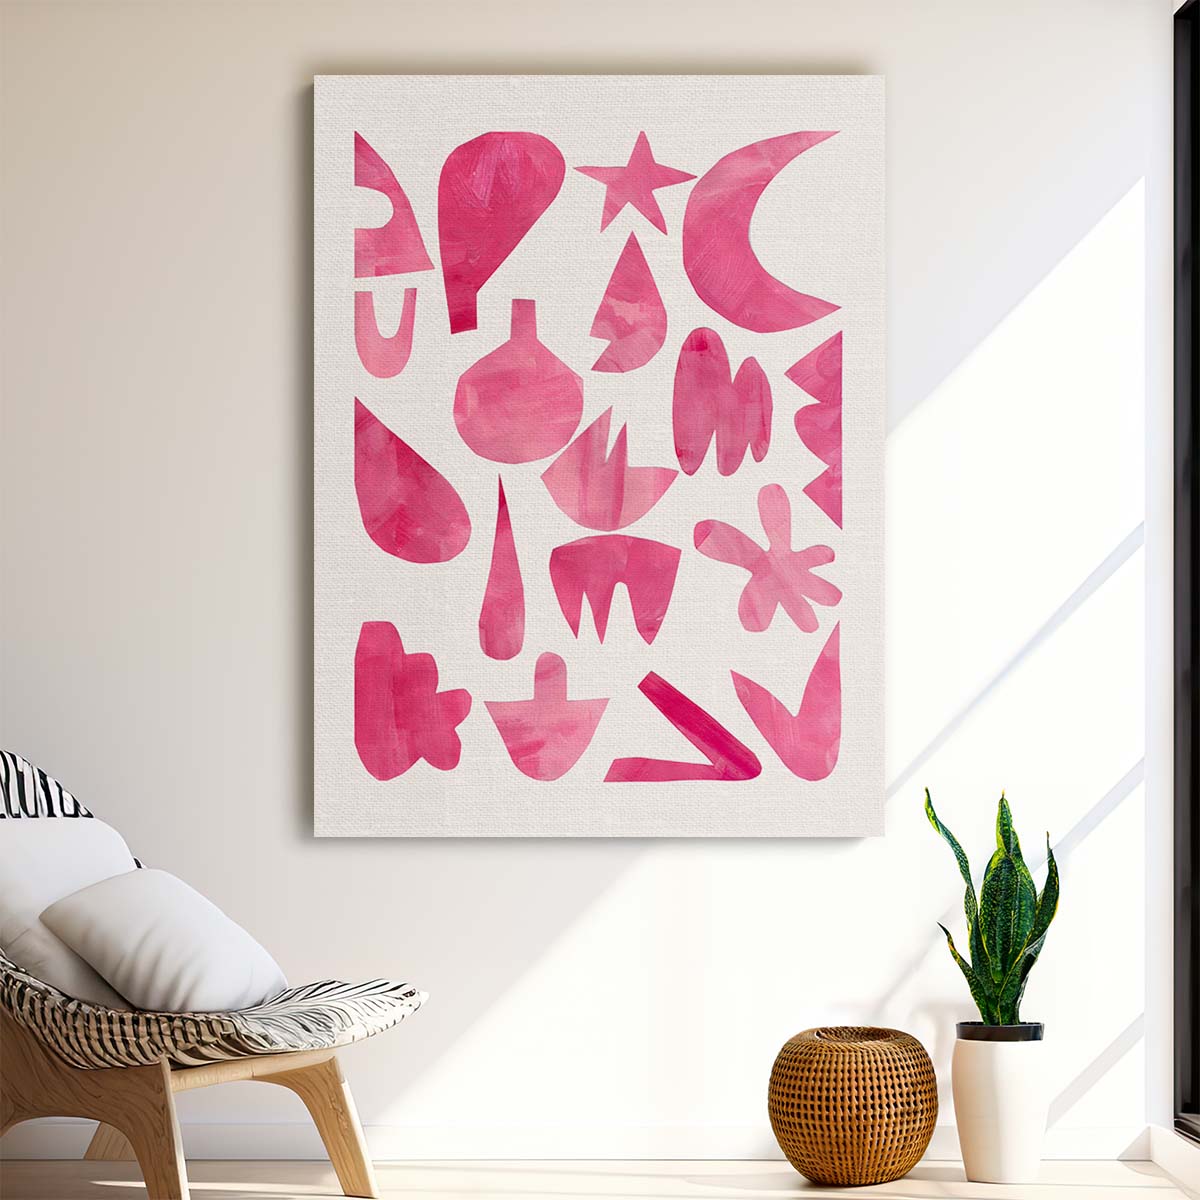 Ejaaz Haniff's Abstract Geometric Illustration Retro Party Art Poster by Luxuriance Designs, made in USA